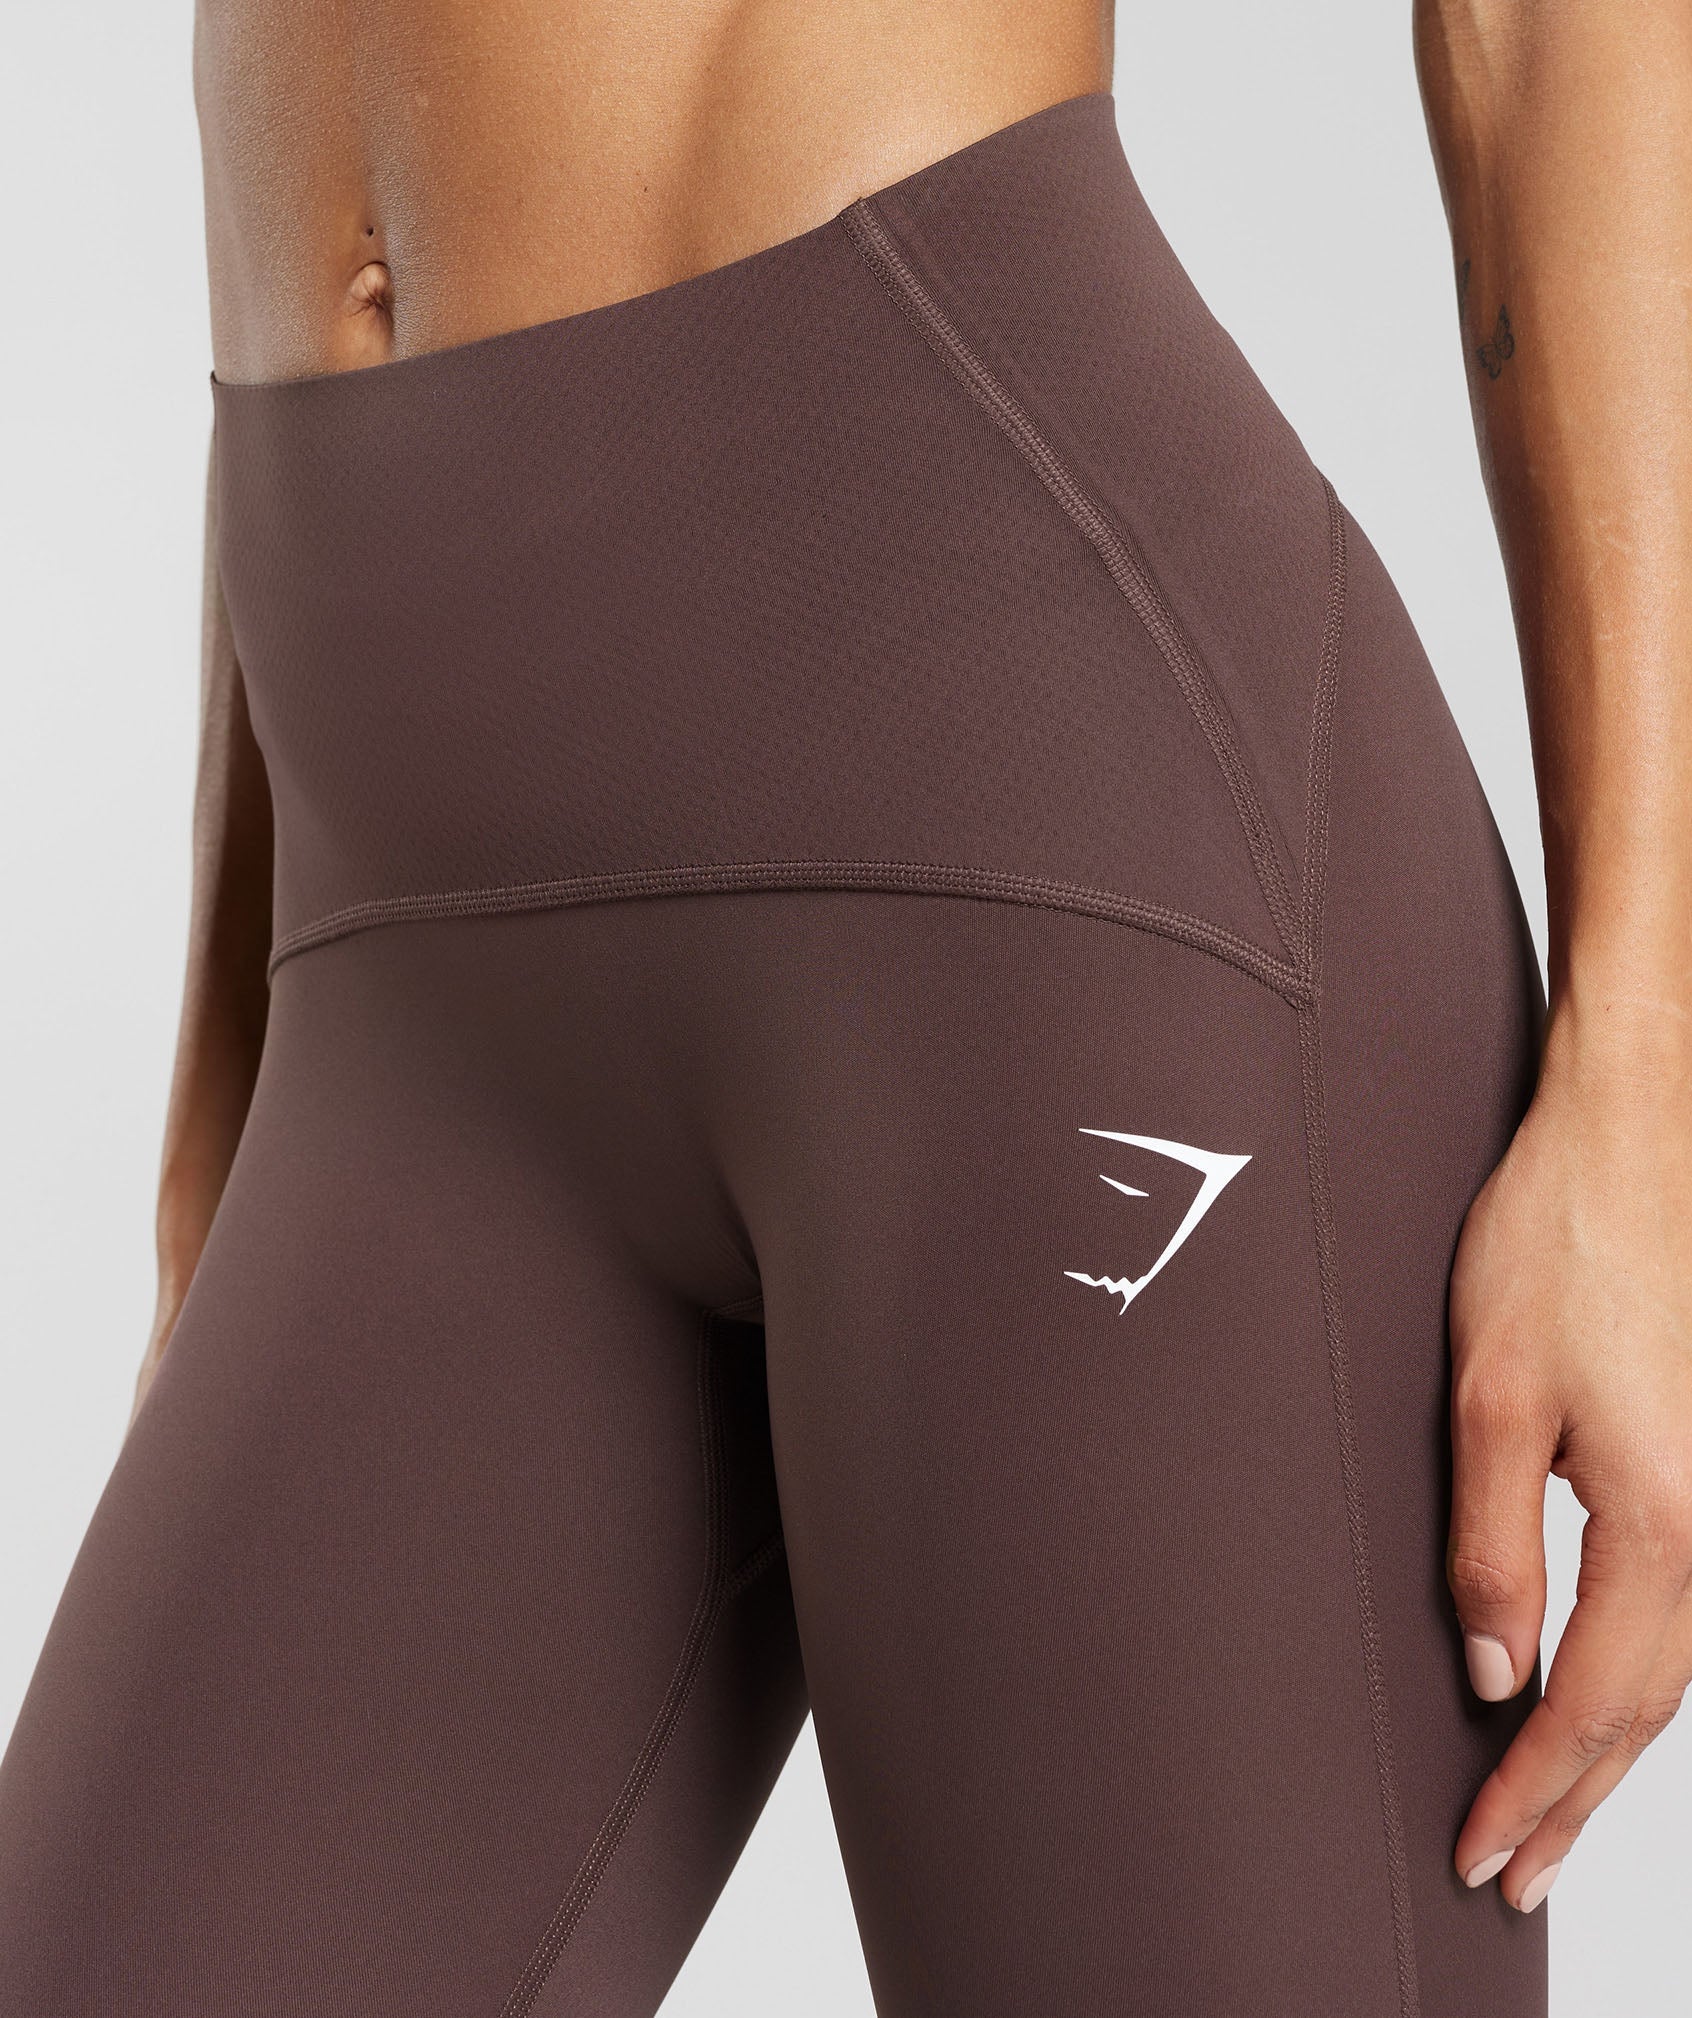 Waist Support Leggings in Chocolate Brown - view 6